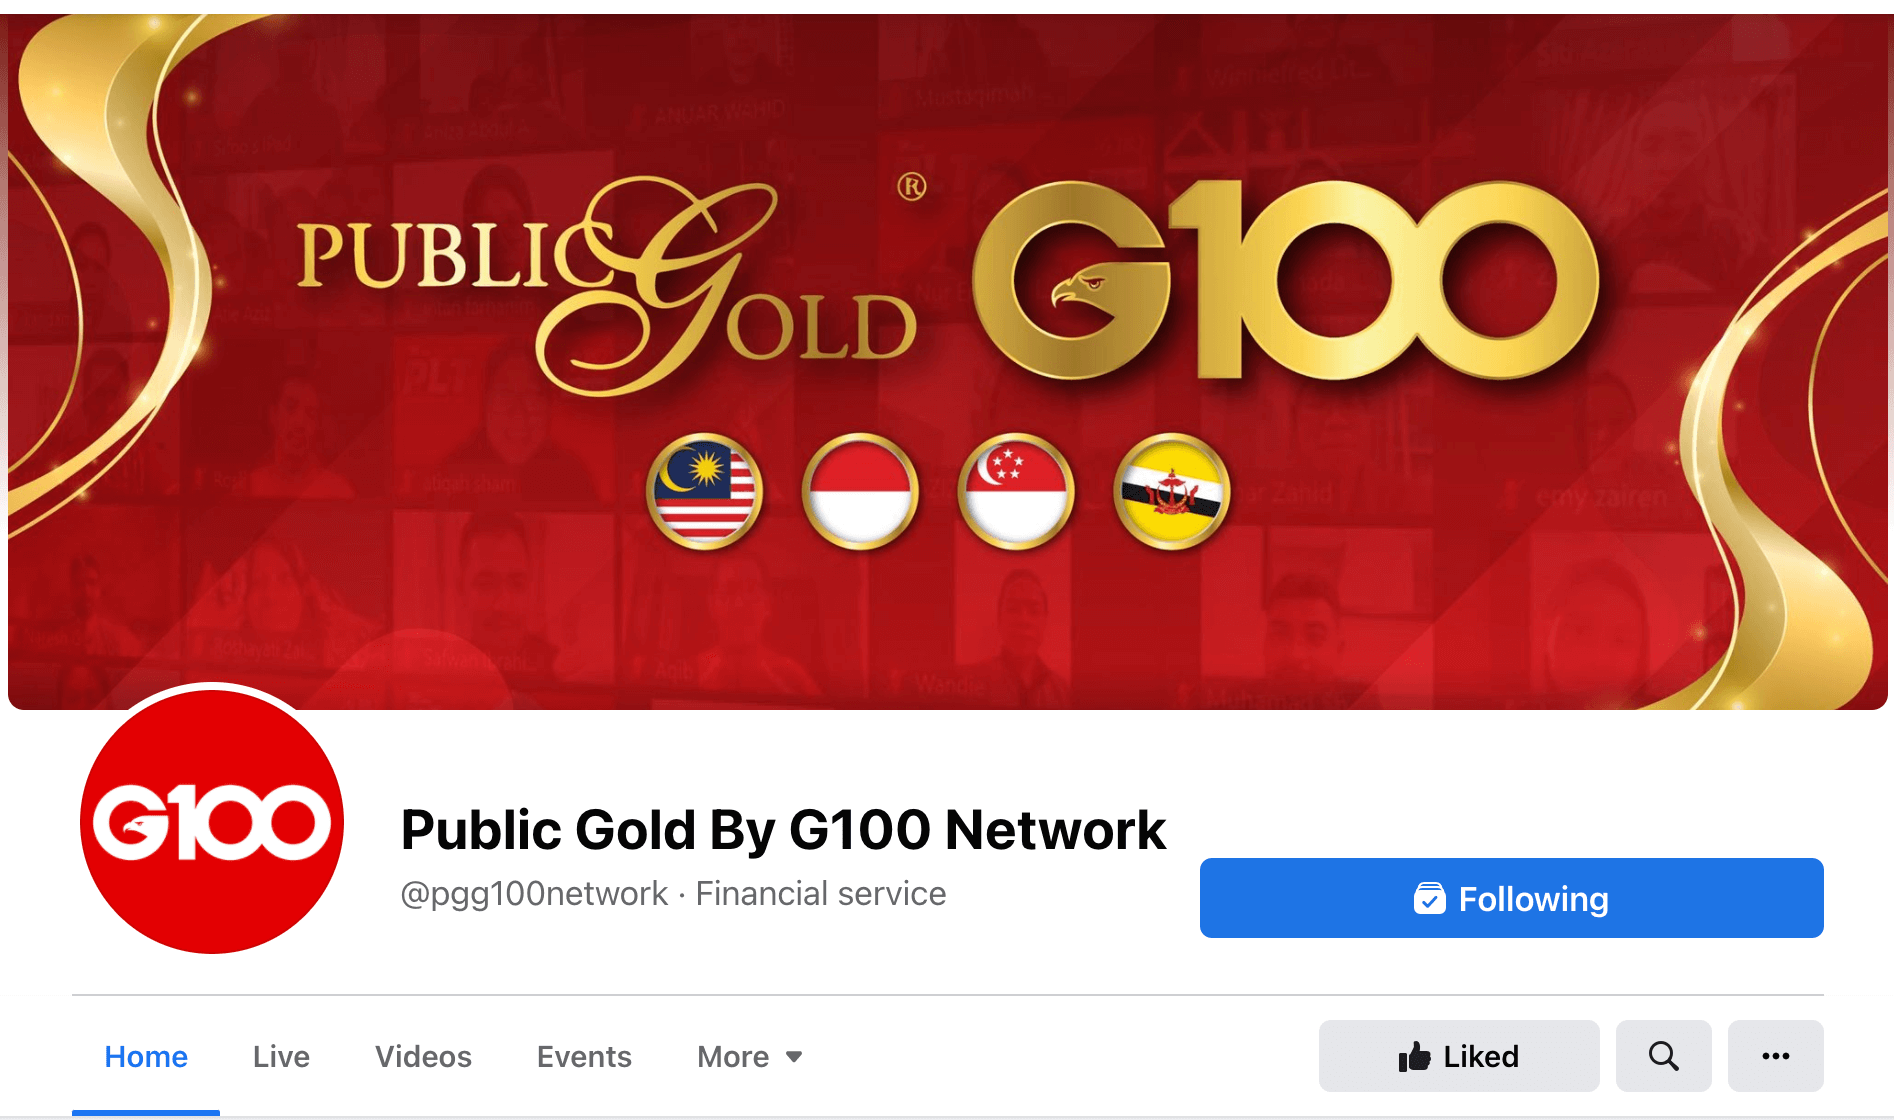 Public Gold by G100 Network